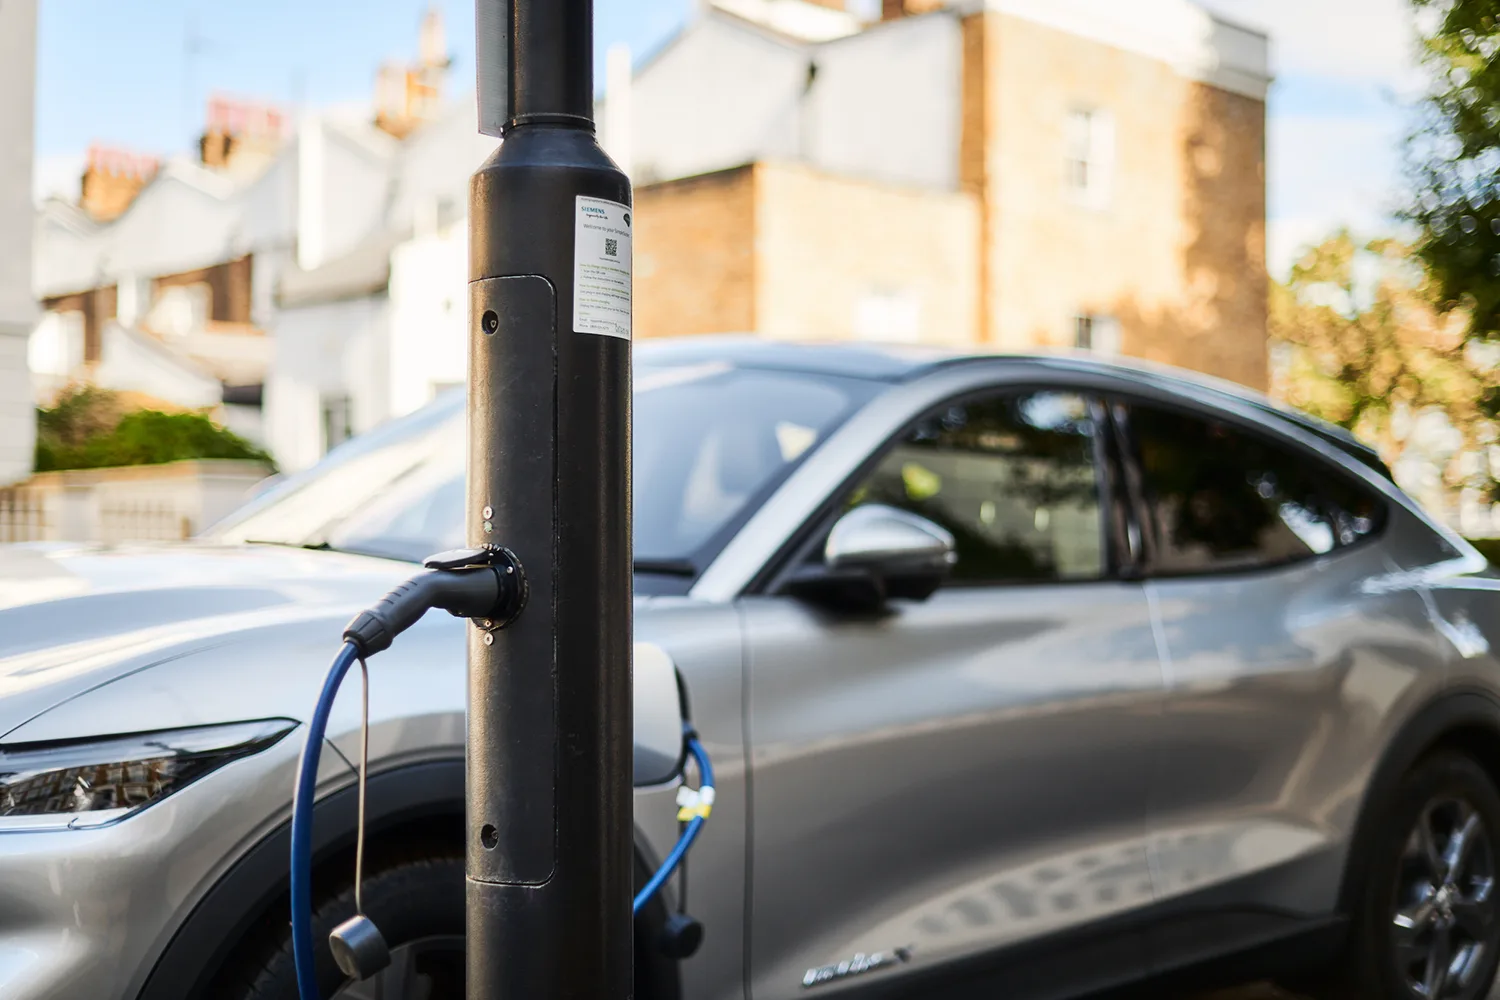 ubitricity’s Rapid Growth Continues with 7,000 Electric Vehicle Charge Points Now Live Across the UK